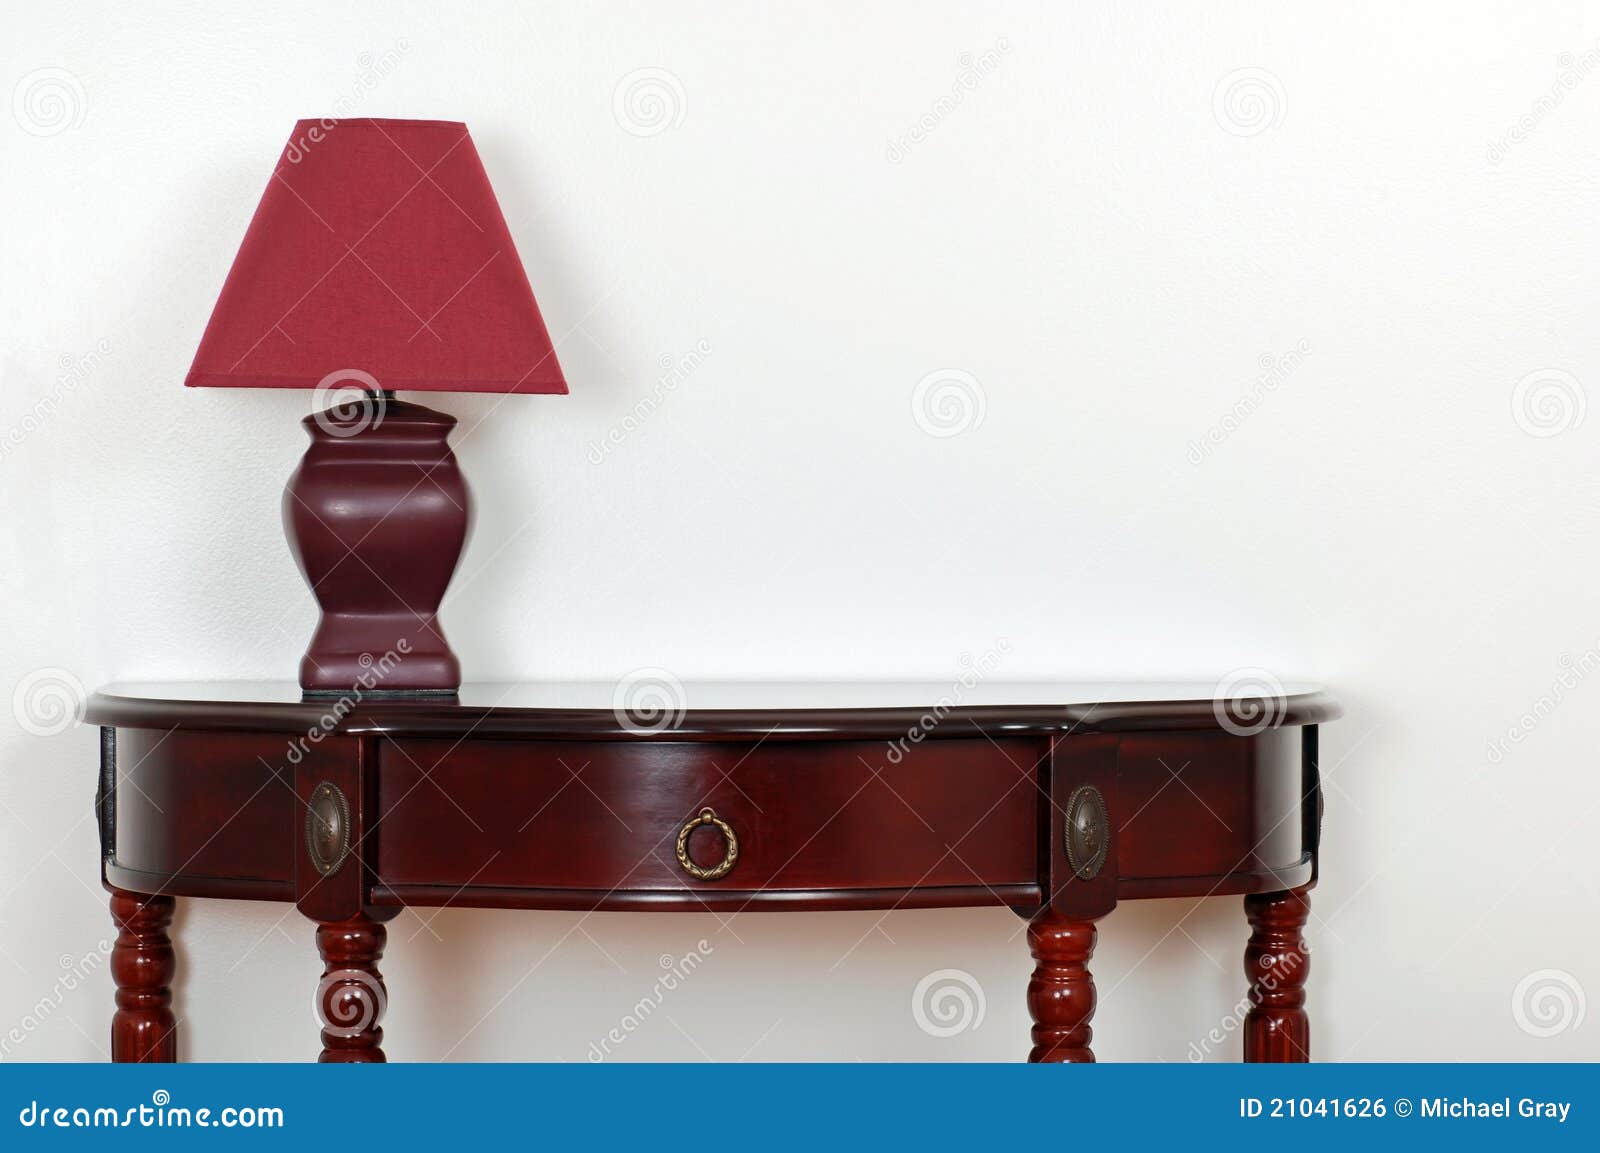 table with red lamp